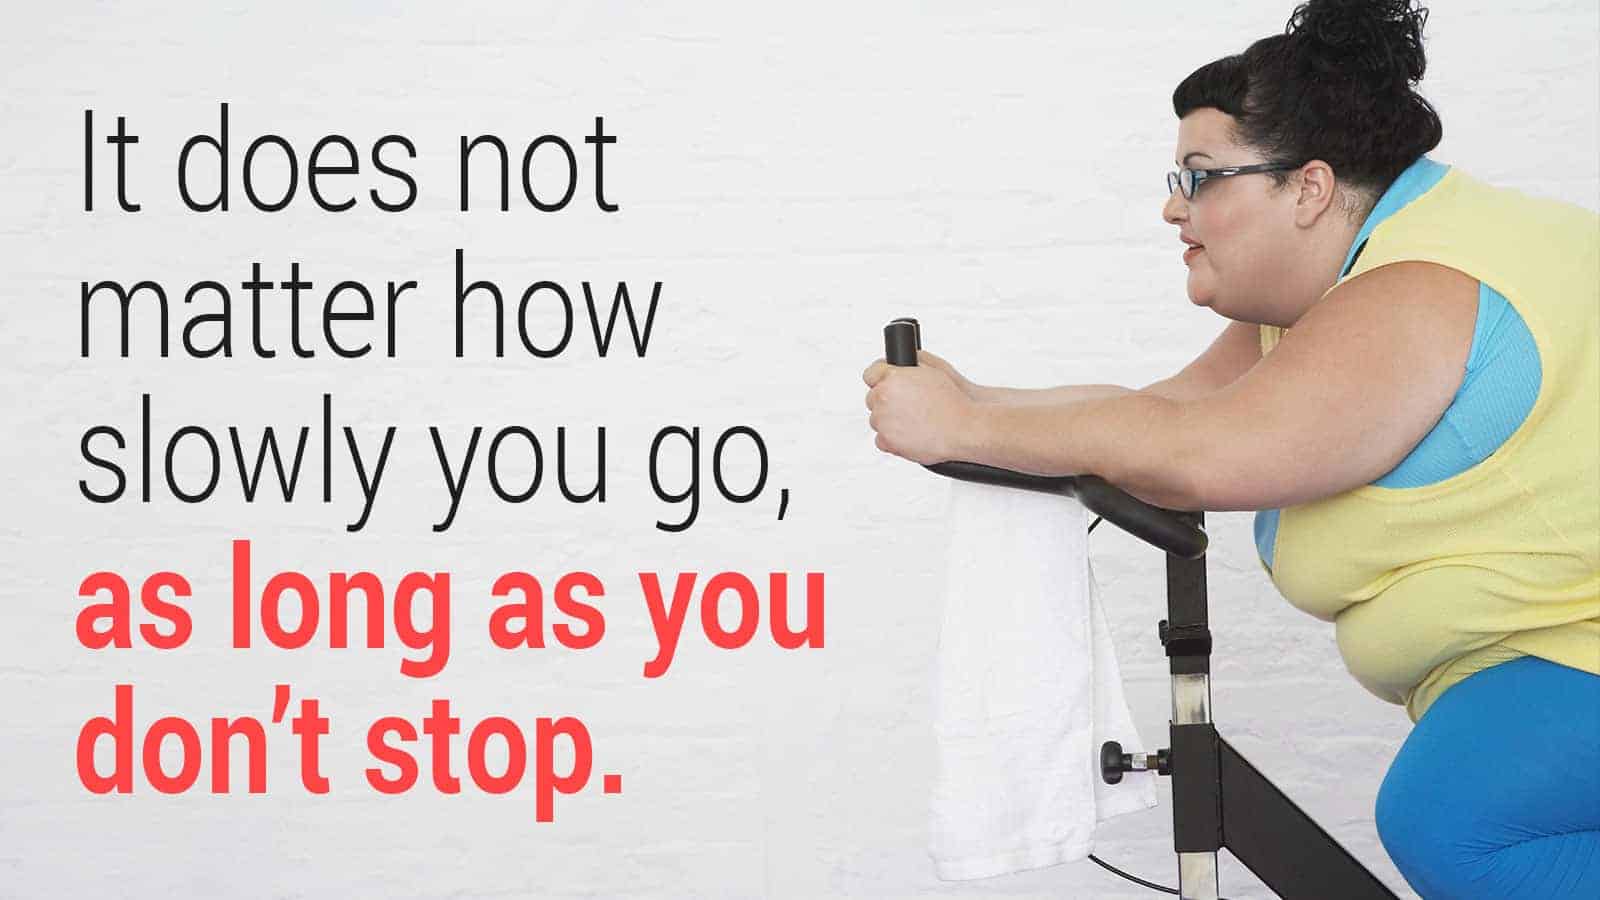 weight loss quotes